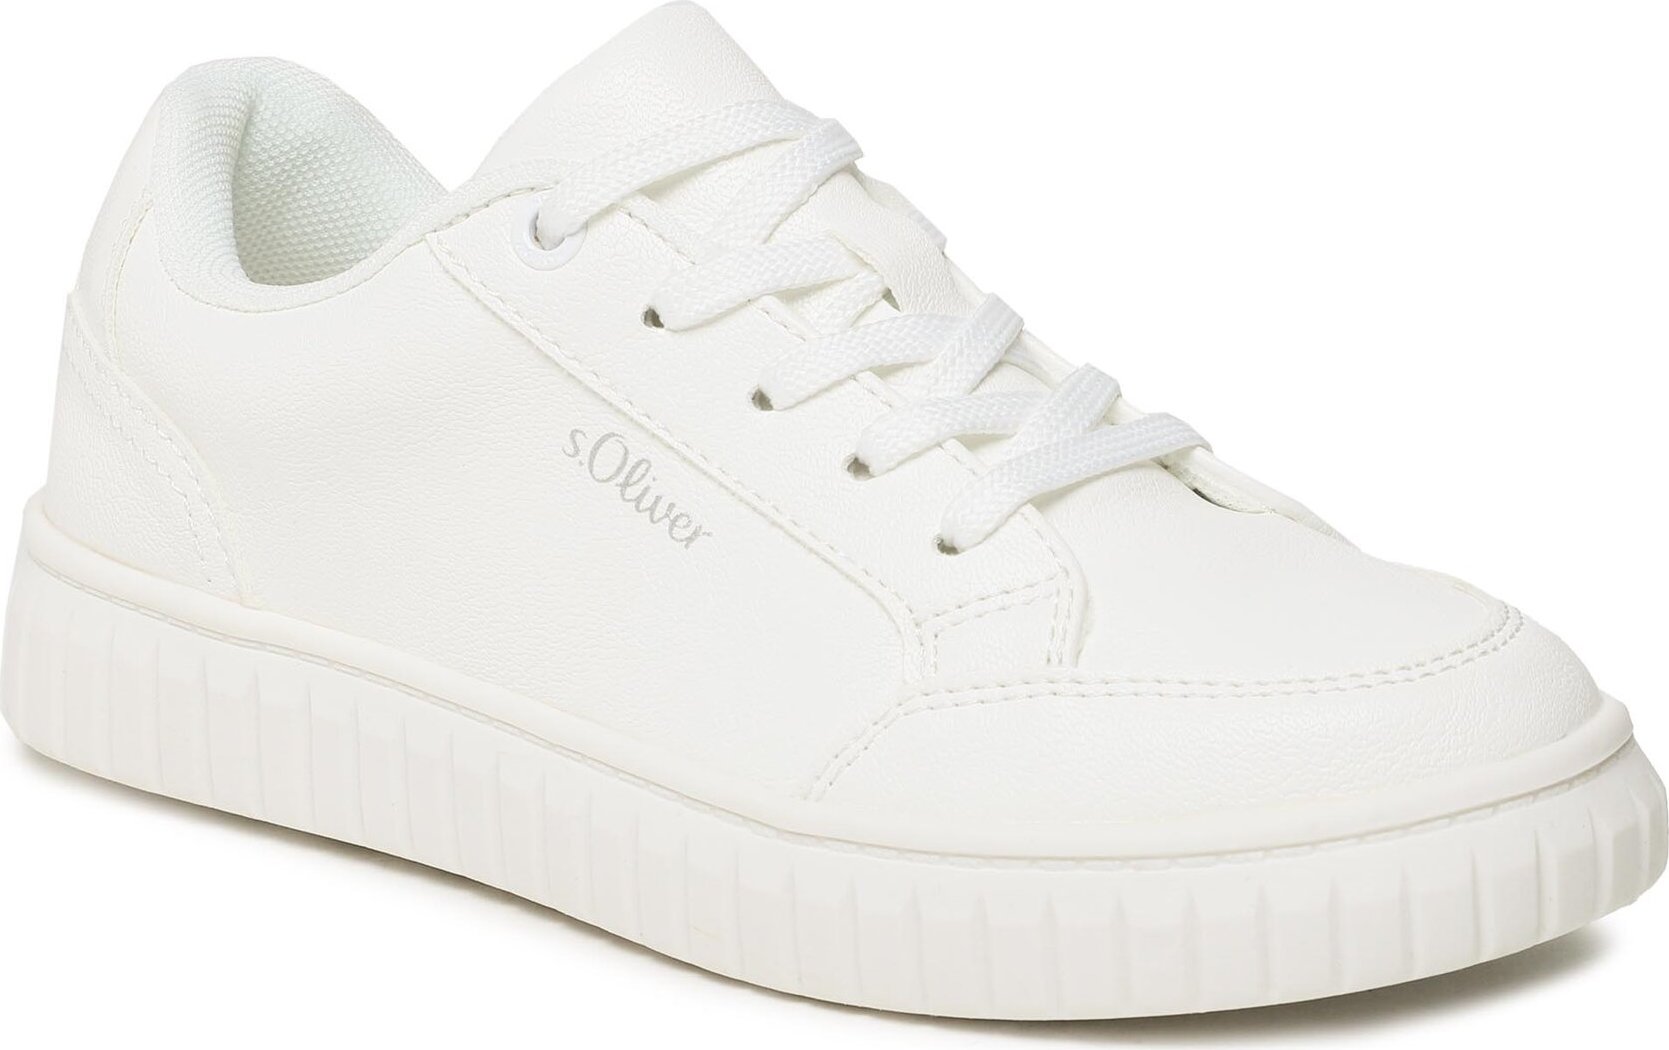 Sneakersy s.Oliver 5-43245-30 White 100